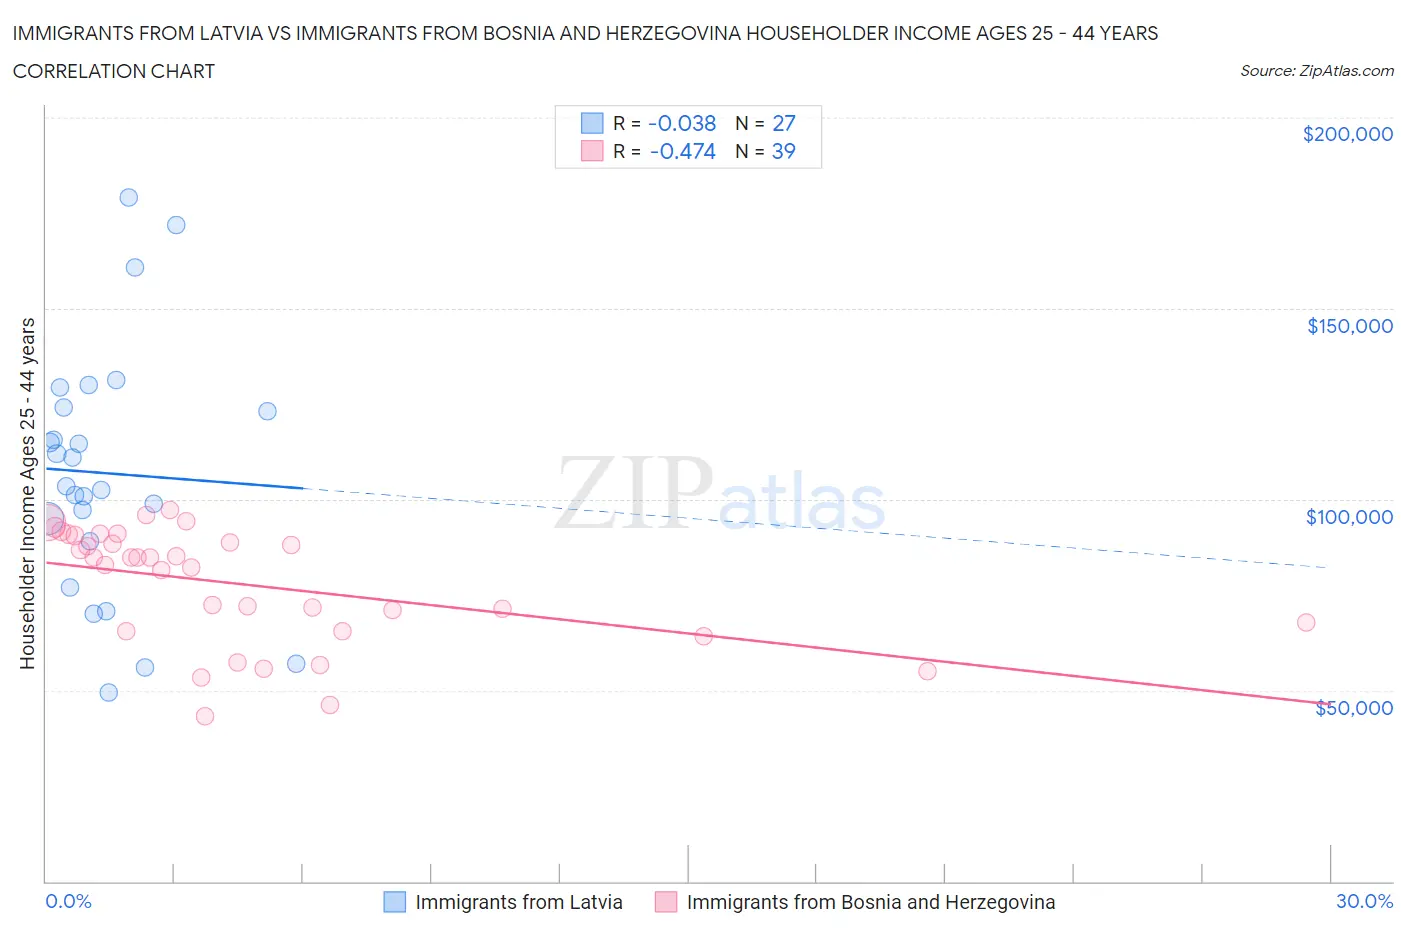 Immigrants from Latvia vs Immigrants from Bosnia and Herzegovina Householder Income Ages 25 - 44 years